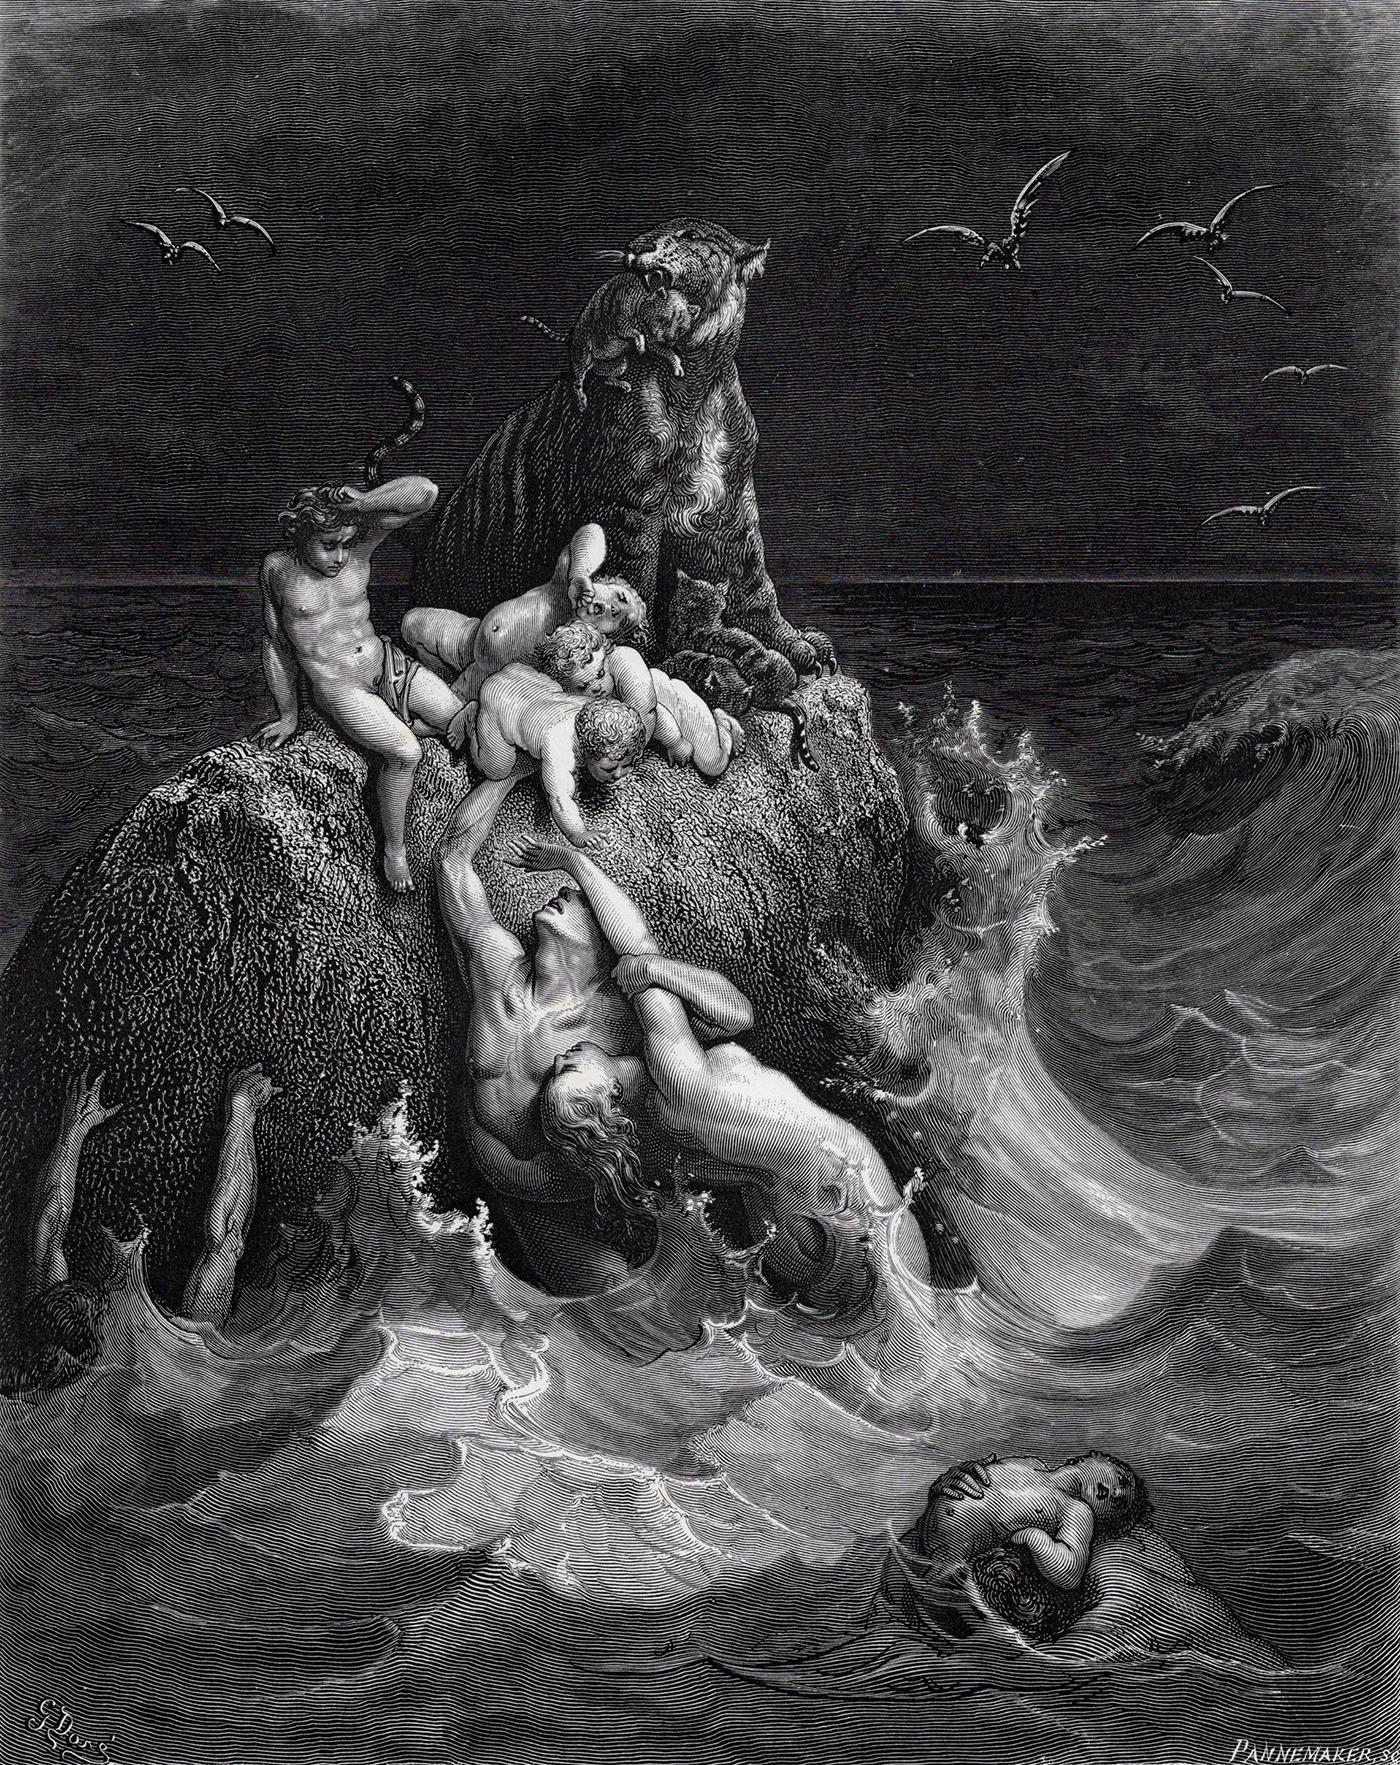 The Deluge (From Dore's Bible) by Gustave Doré, Adolphe Francois Pannemaker, c. 1880